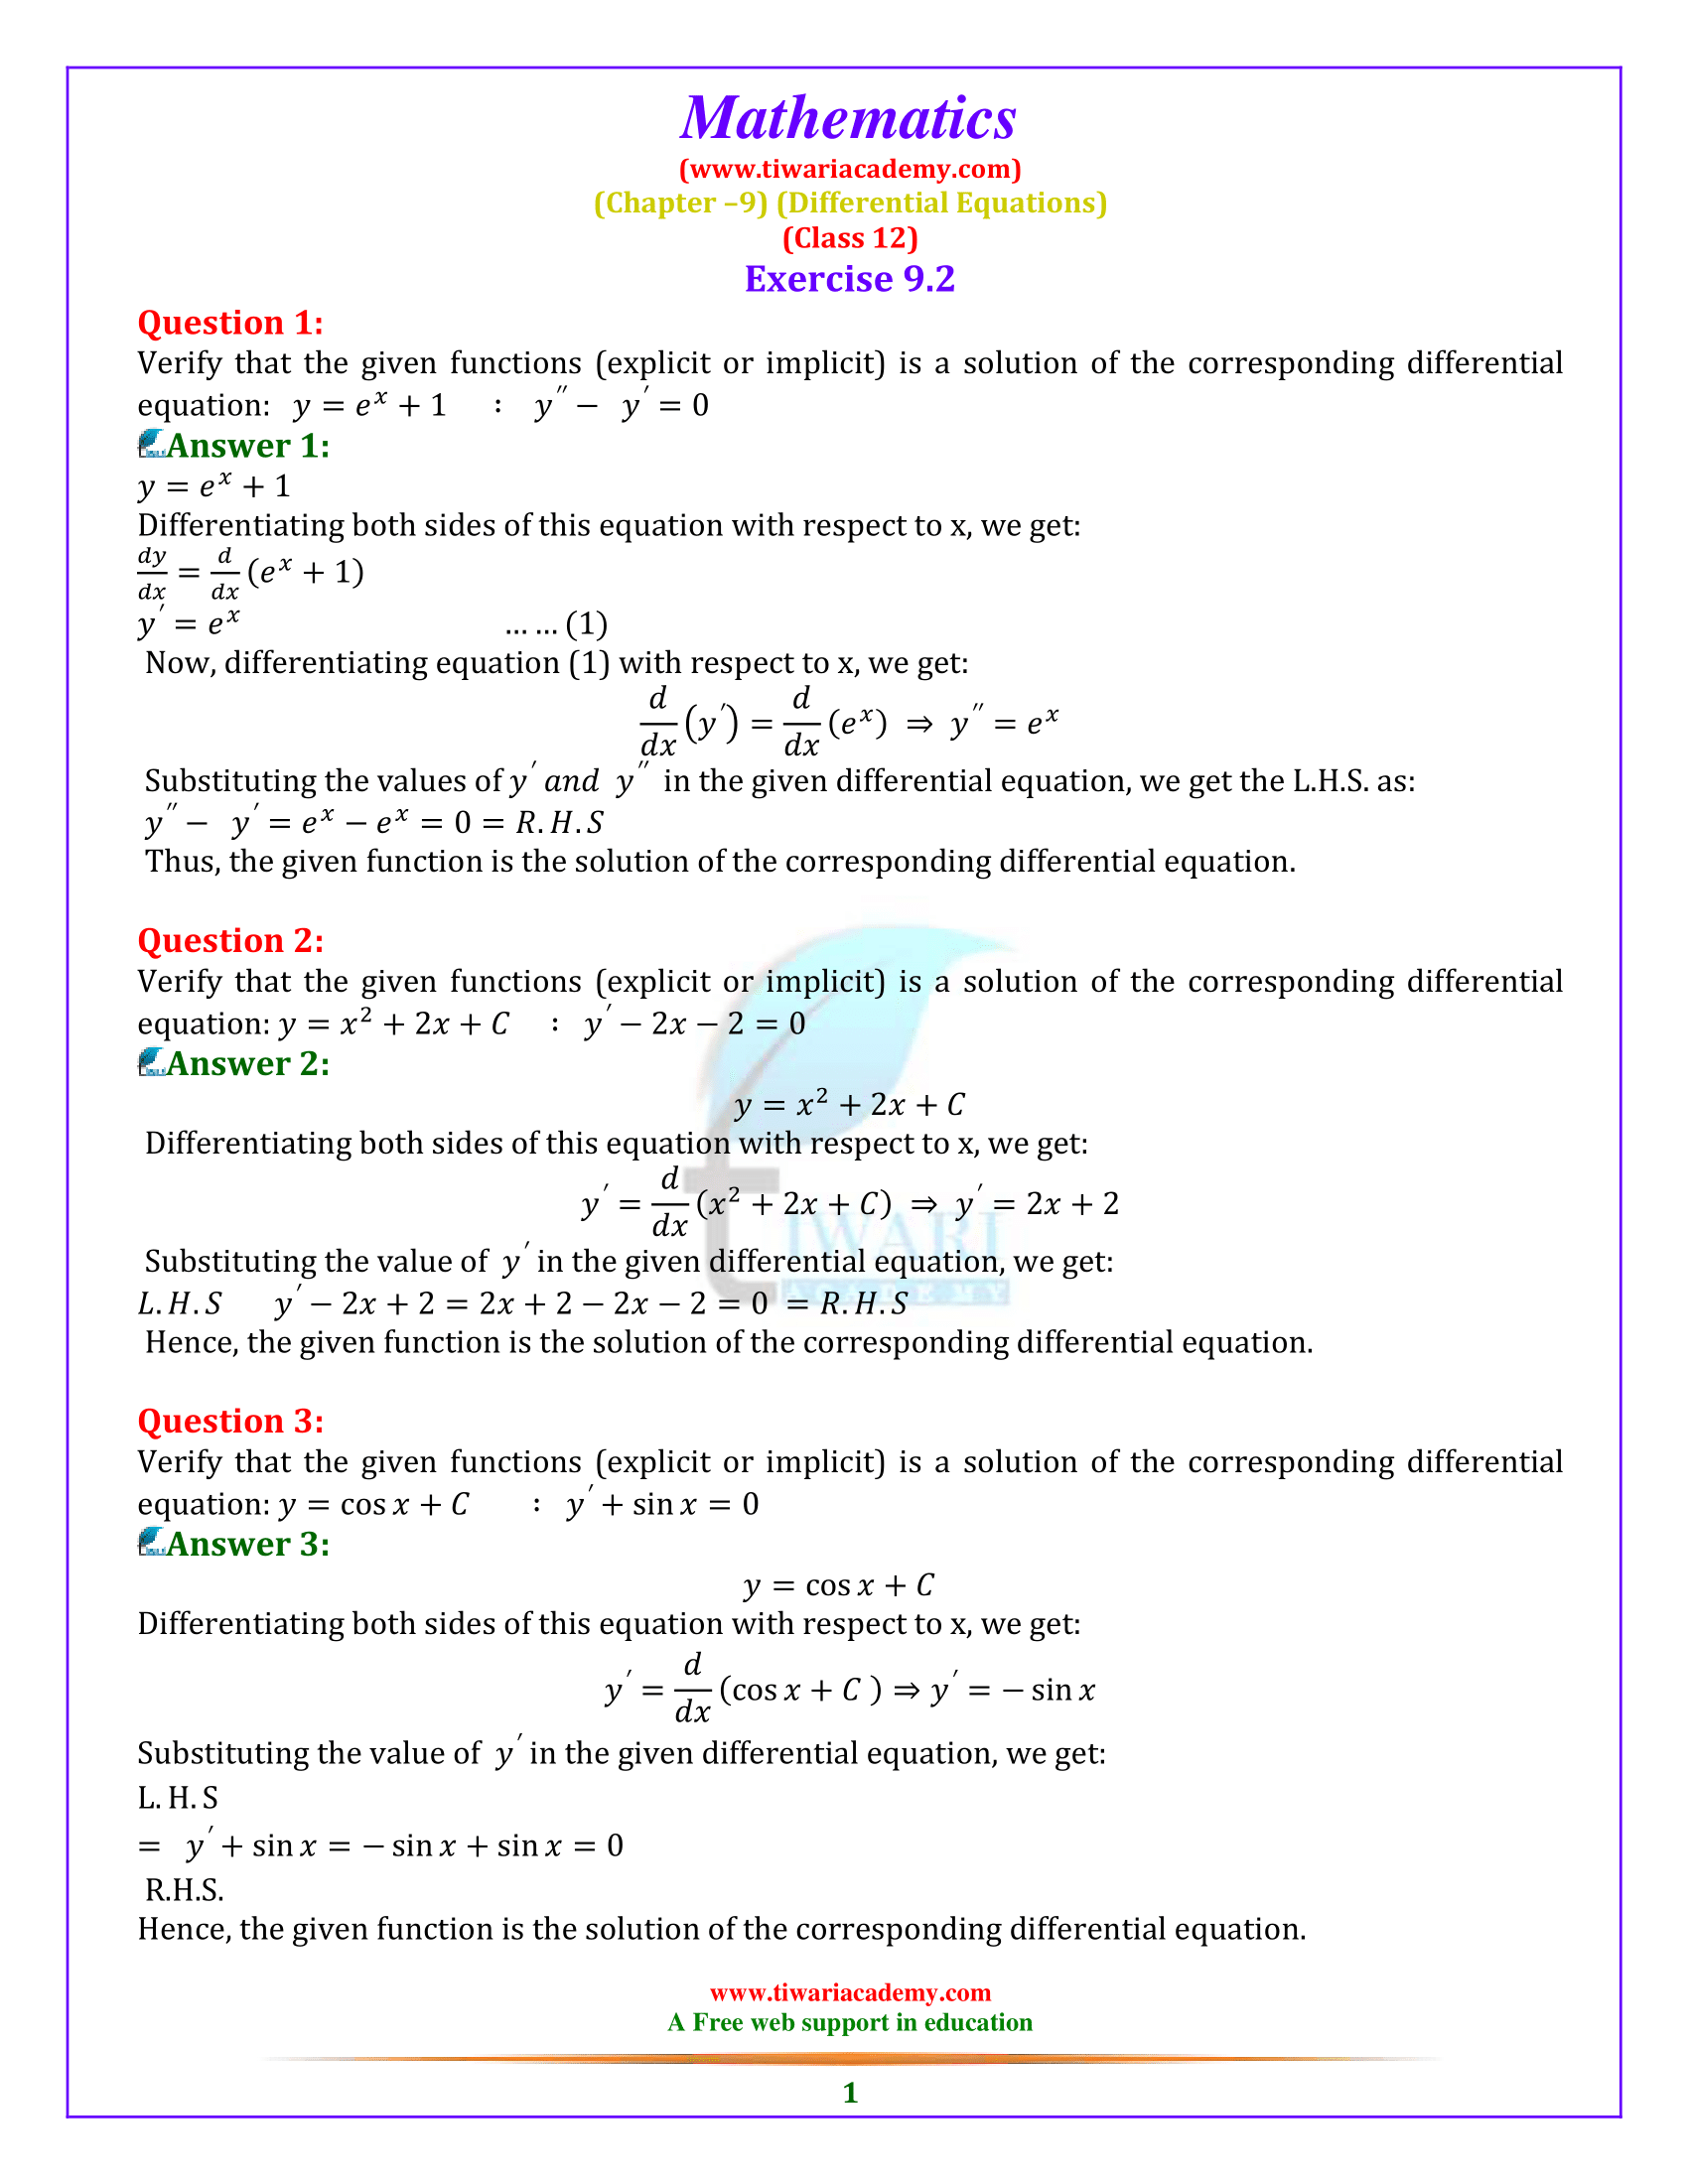 Class 12 Maths Exercise 9.2 Solutions in English Medium